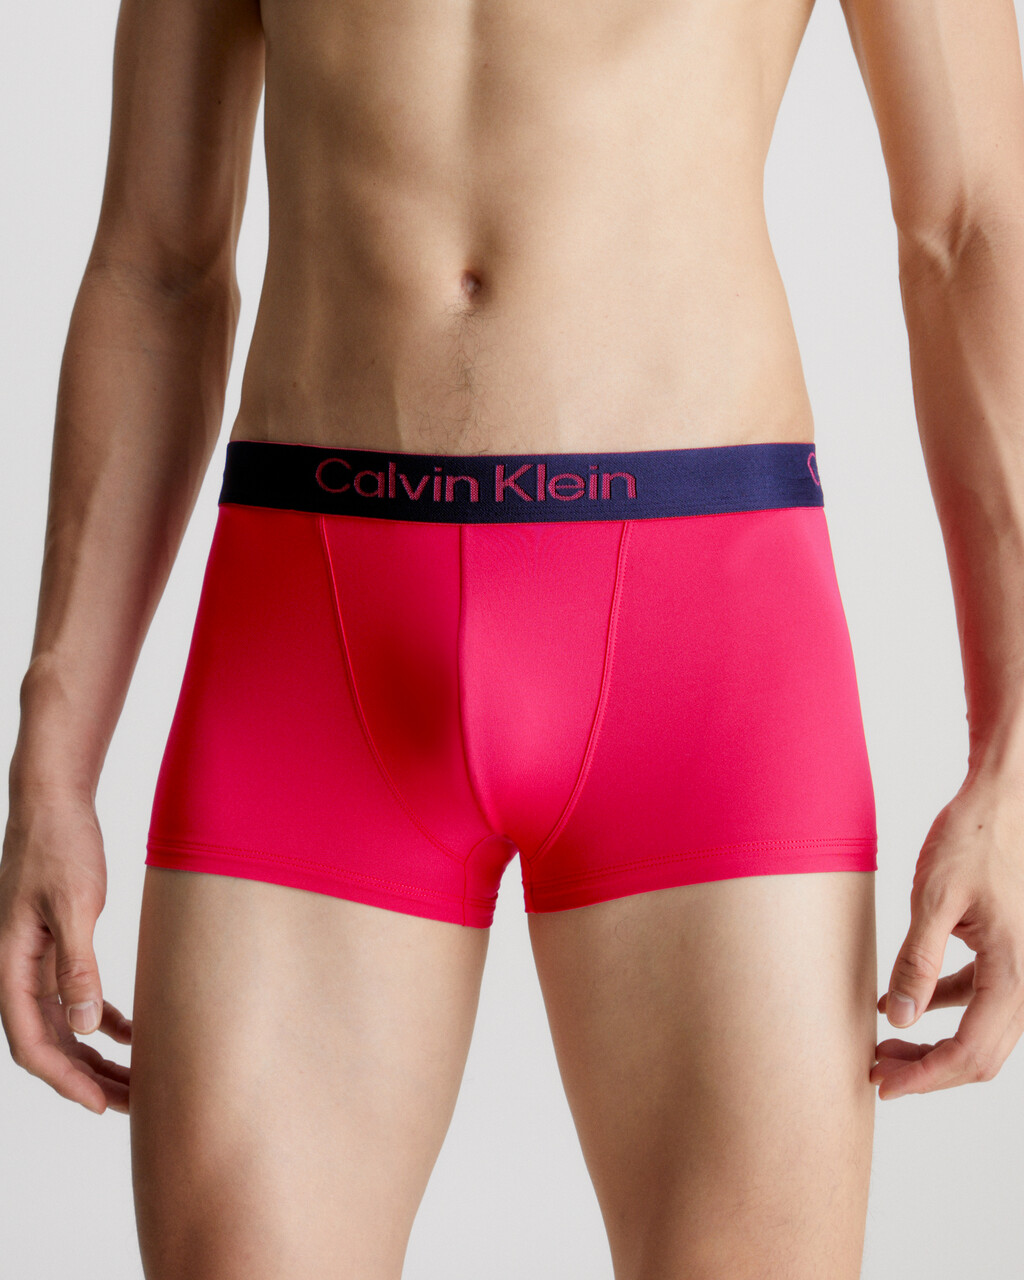 CK Black Low Rise Trunks, red